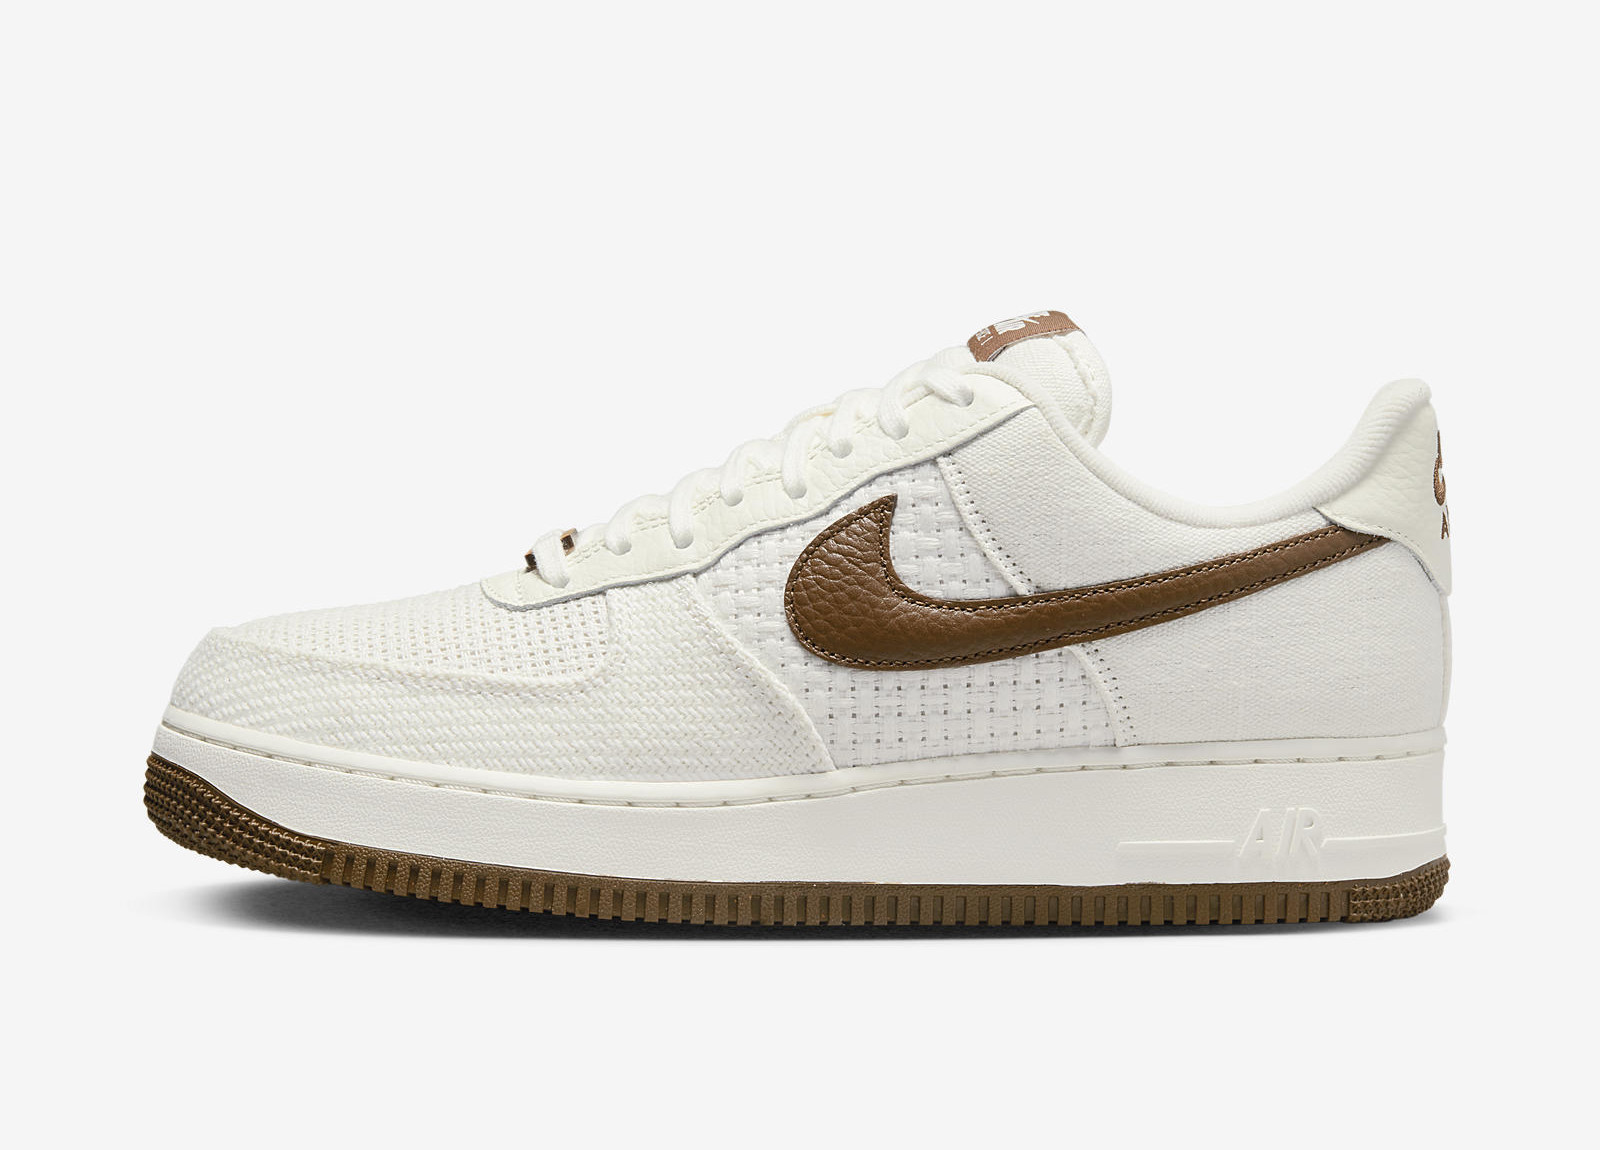 Nike Air Force 1
« SNKRS Day »